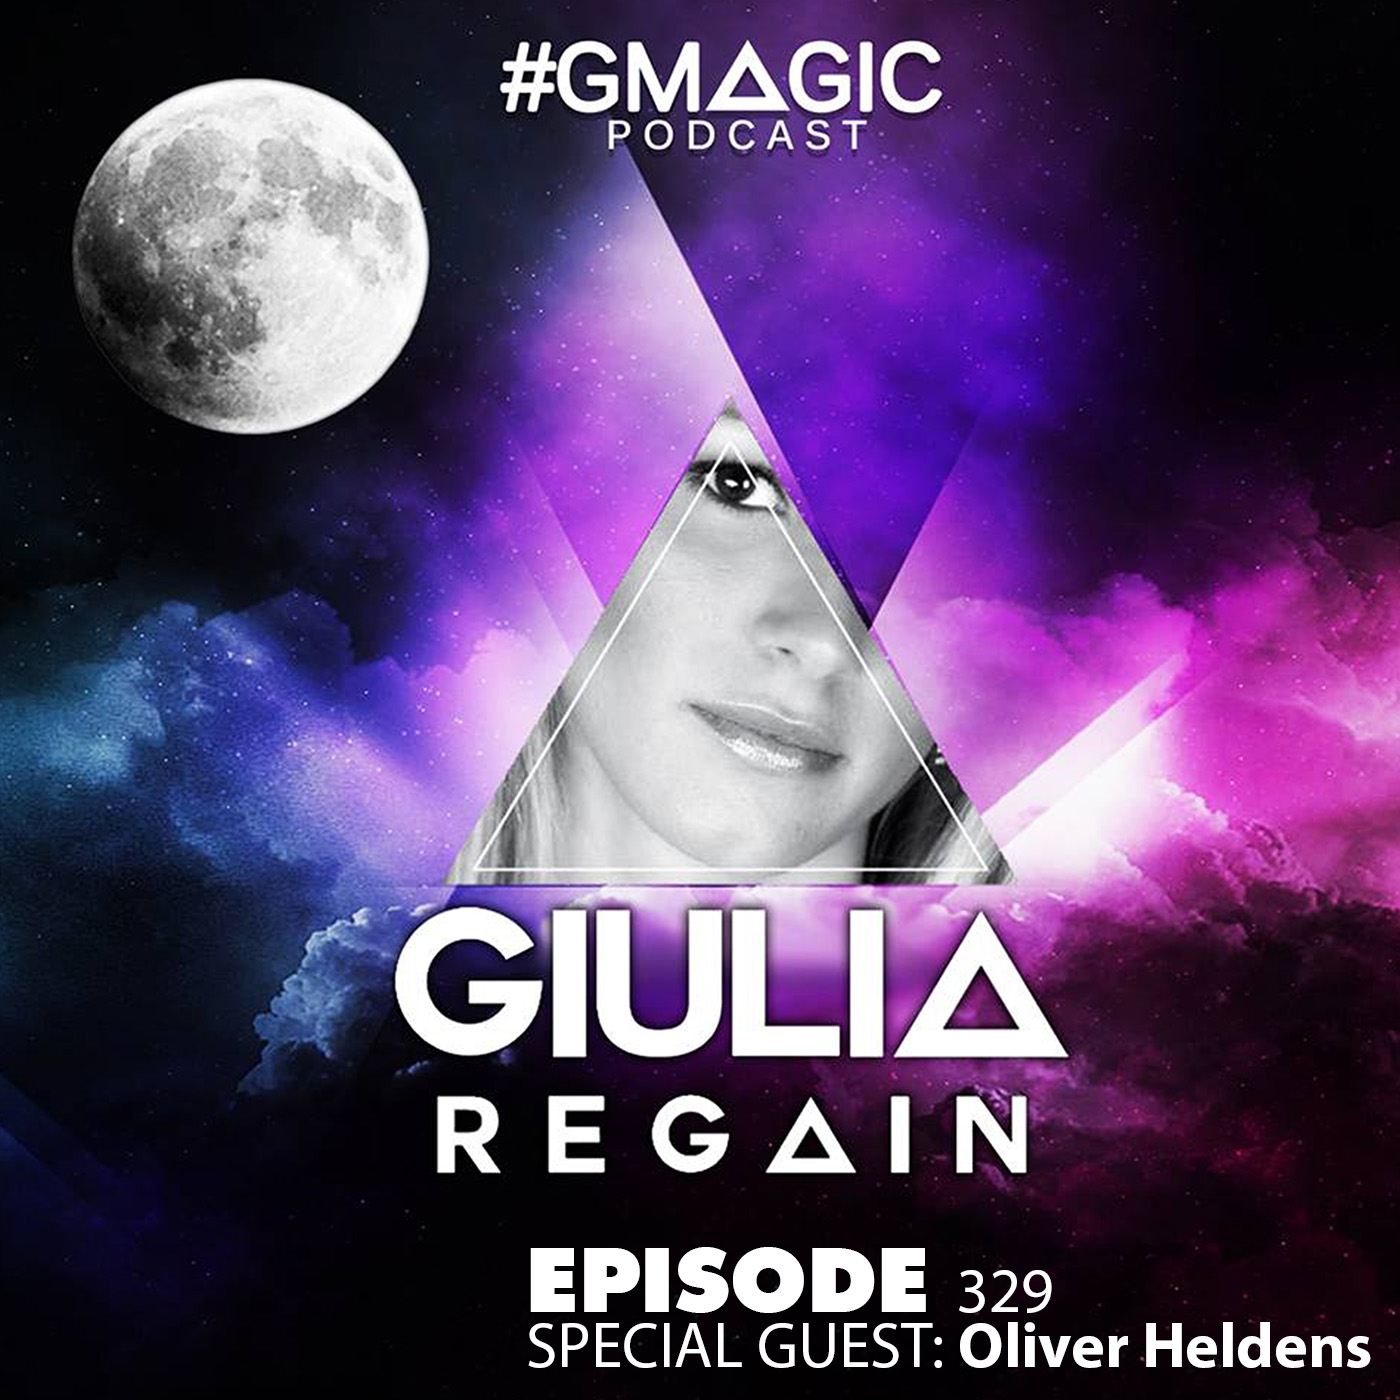 #Gmagic Podcast 329 - Special Guest: Oliver Heldens